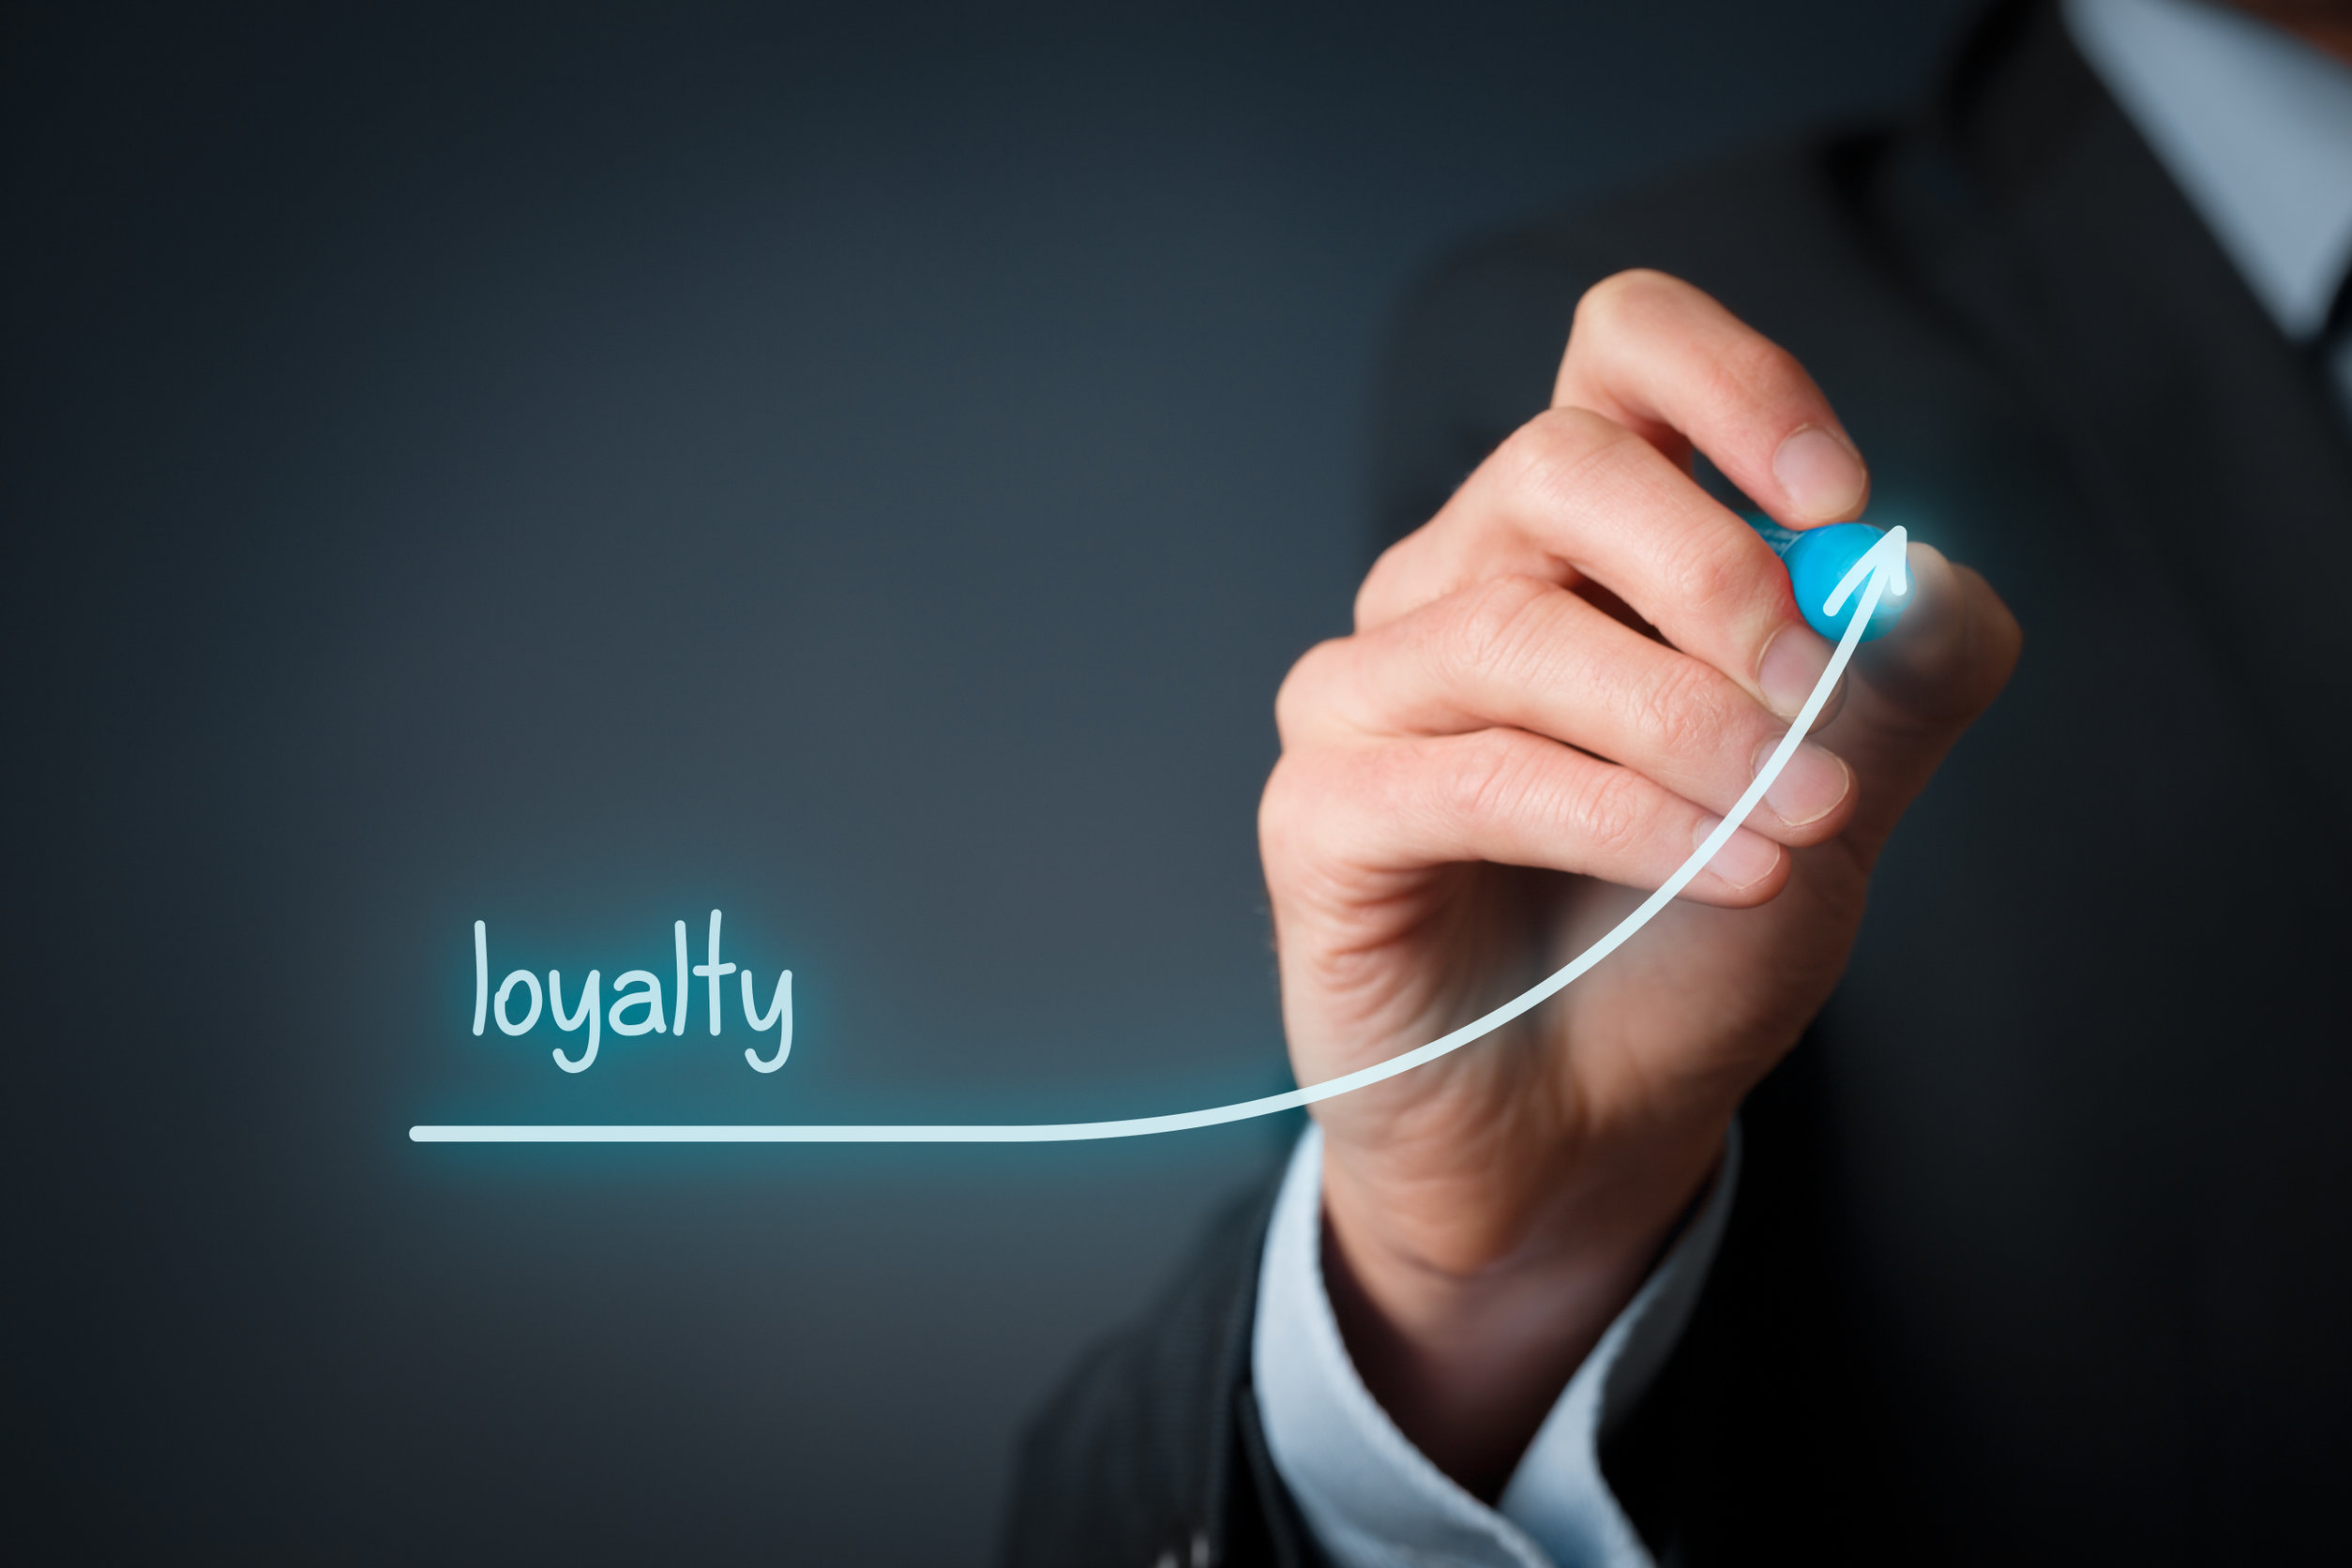 How To Inspire Loyalty
